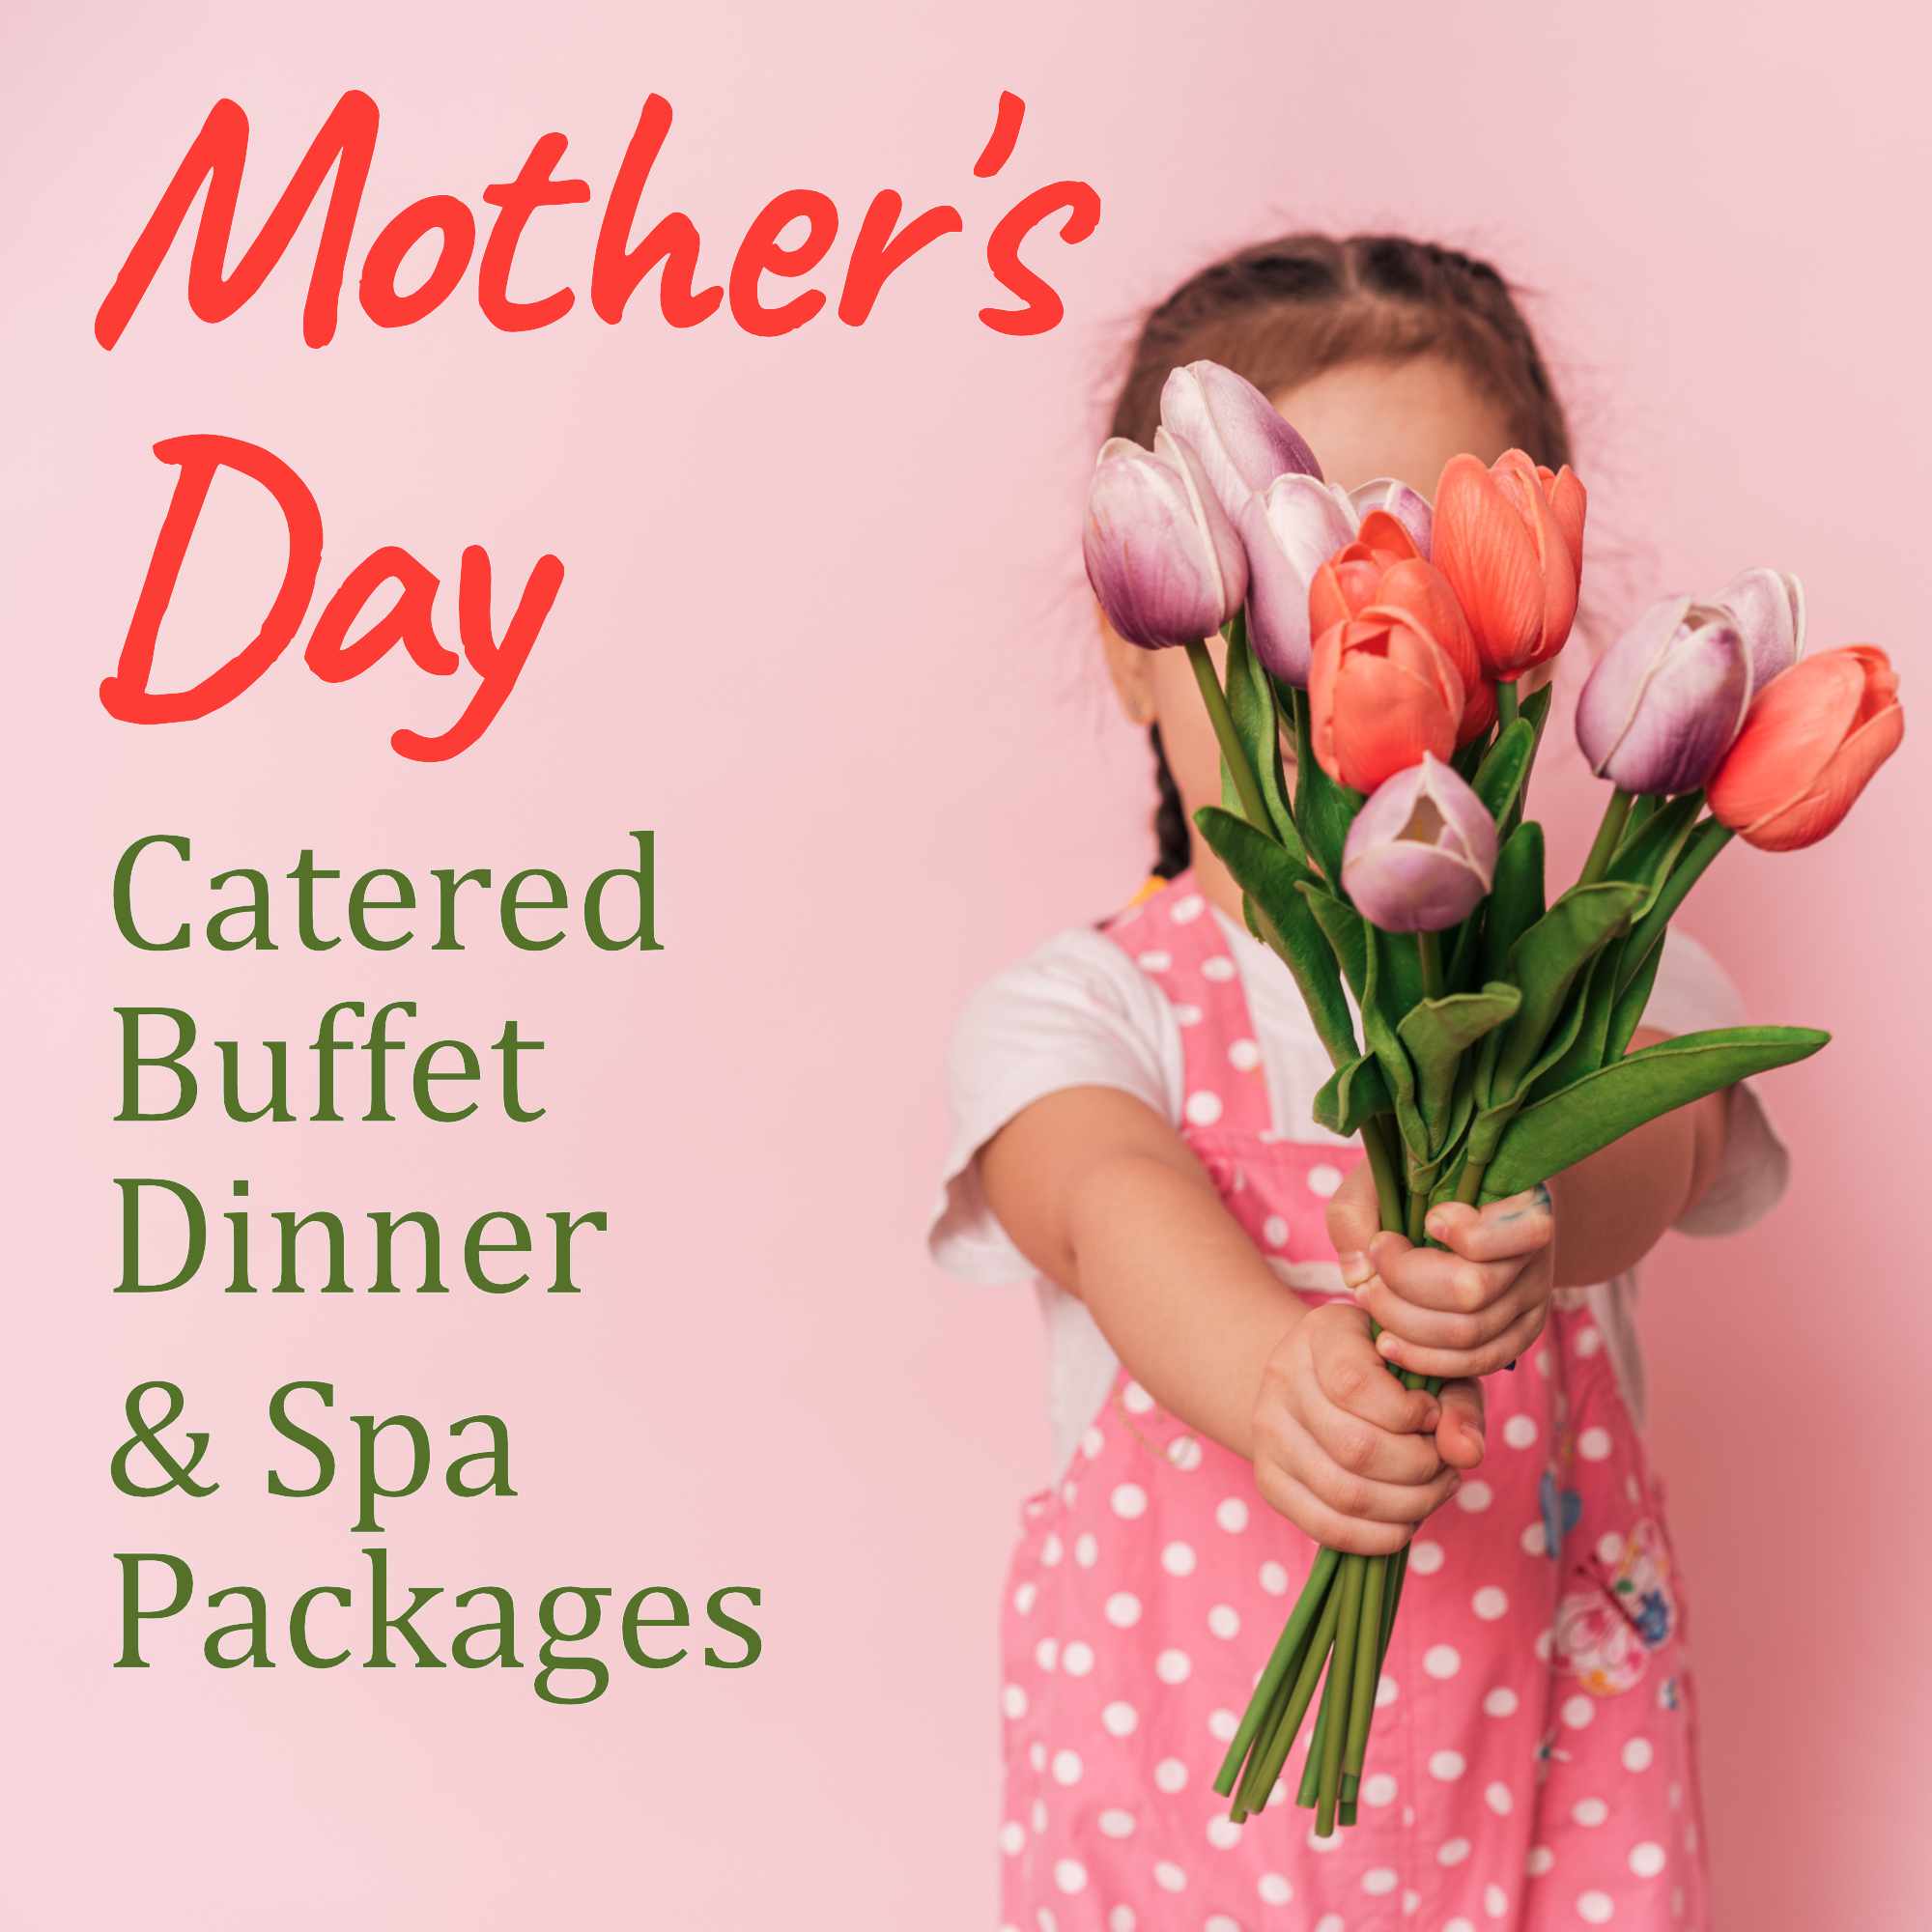 Mother's Day Catered Buffet Dinner & Spa Packages, photo of girl in pink dress holding tulips